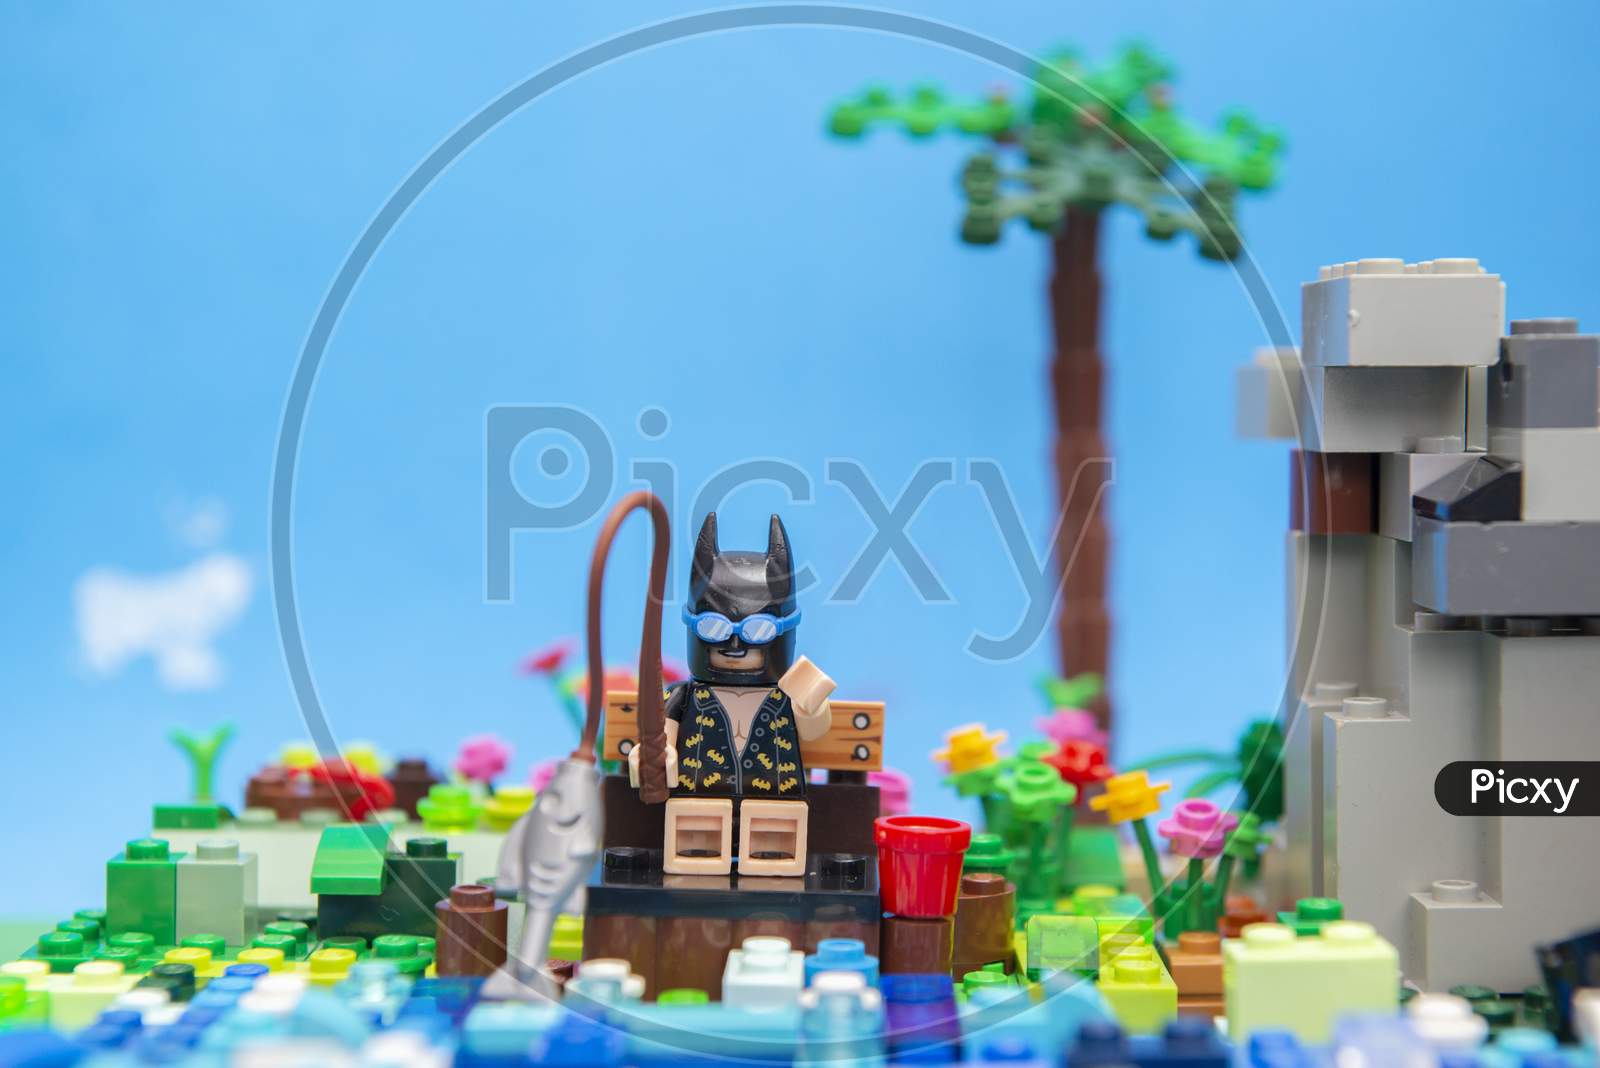 Florianopolis, Brazil. September 20, 2020: Batman Minifigure Sitting On A Wooden Bench Enjoying His Vacation And Fishing By The River Next To A Hillside. Concept Of Everyone Deserves Rest.